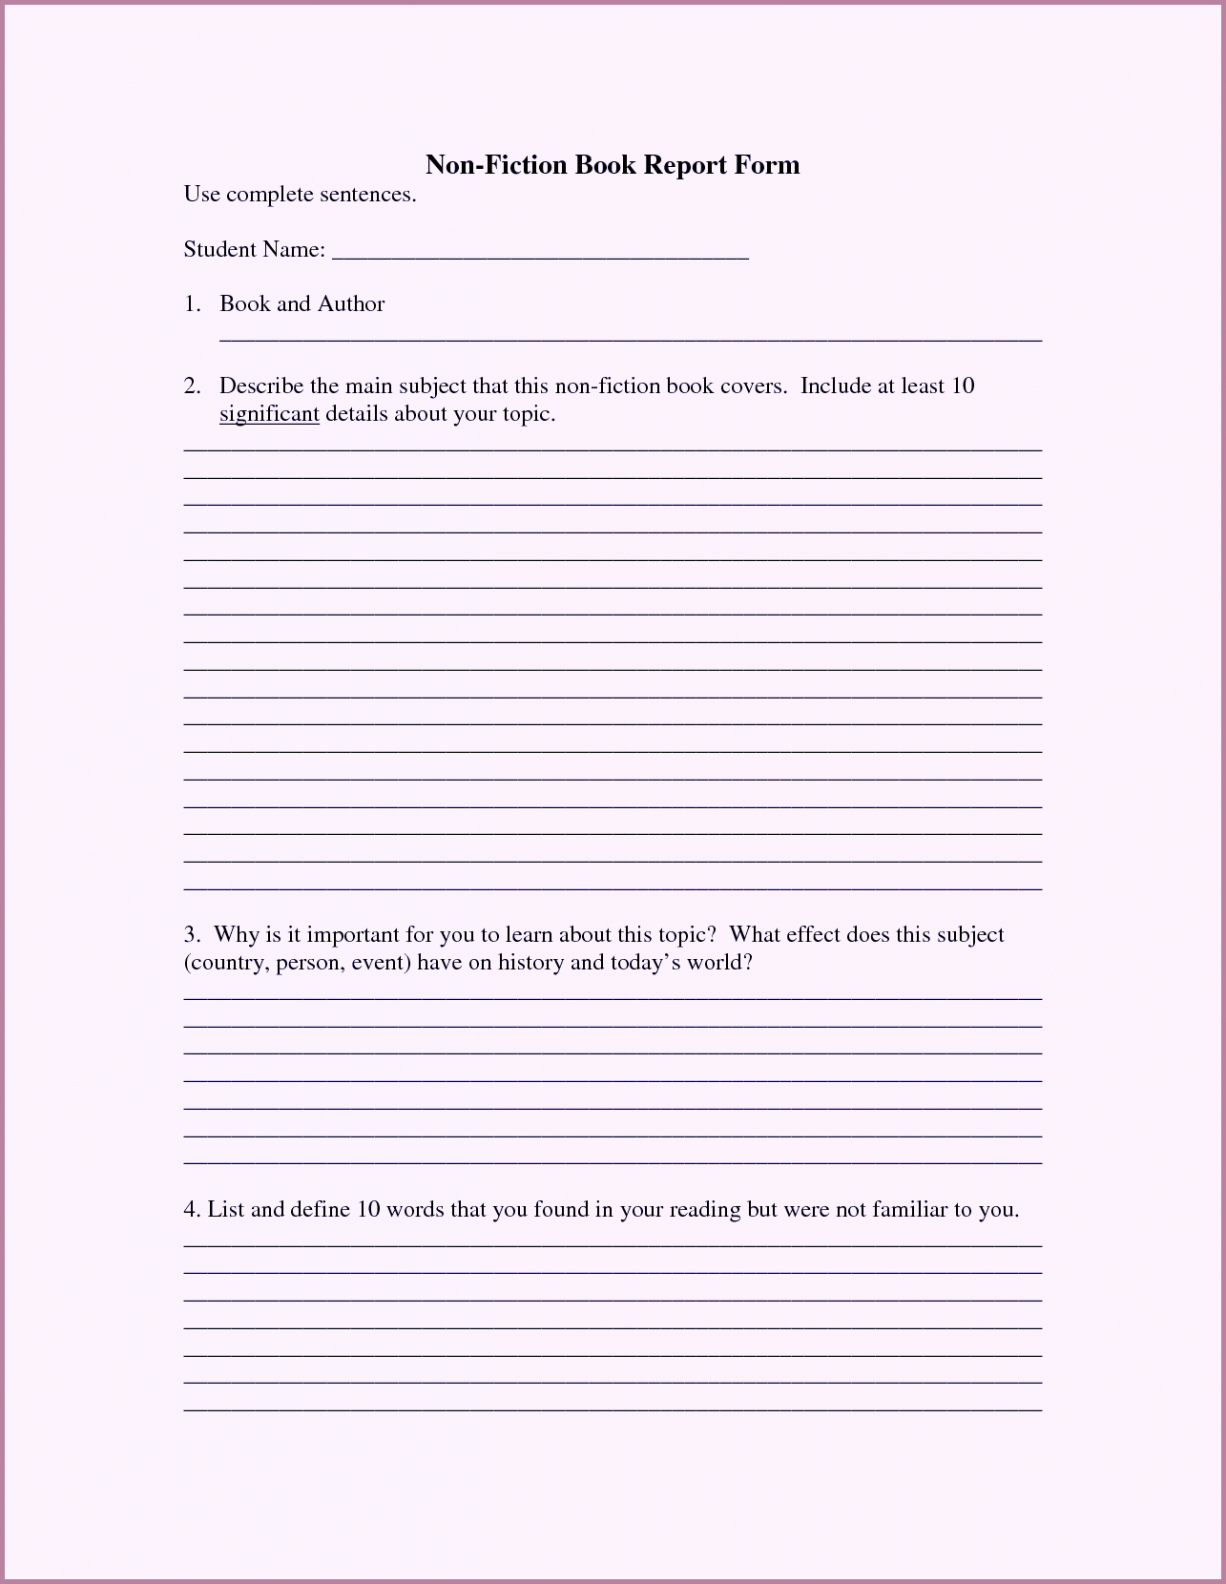 Nonfiction Worksheet For 5Th Grade | Printable Worksheets With Regard To Nonfiction Book Report Template